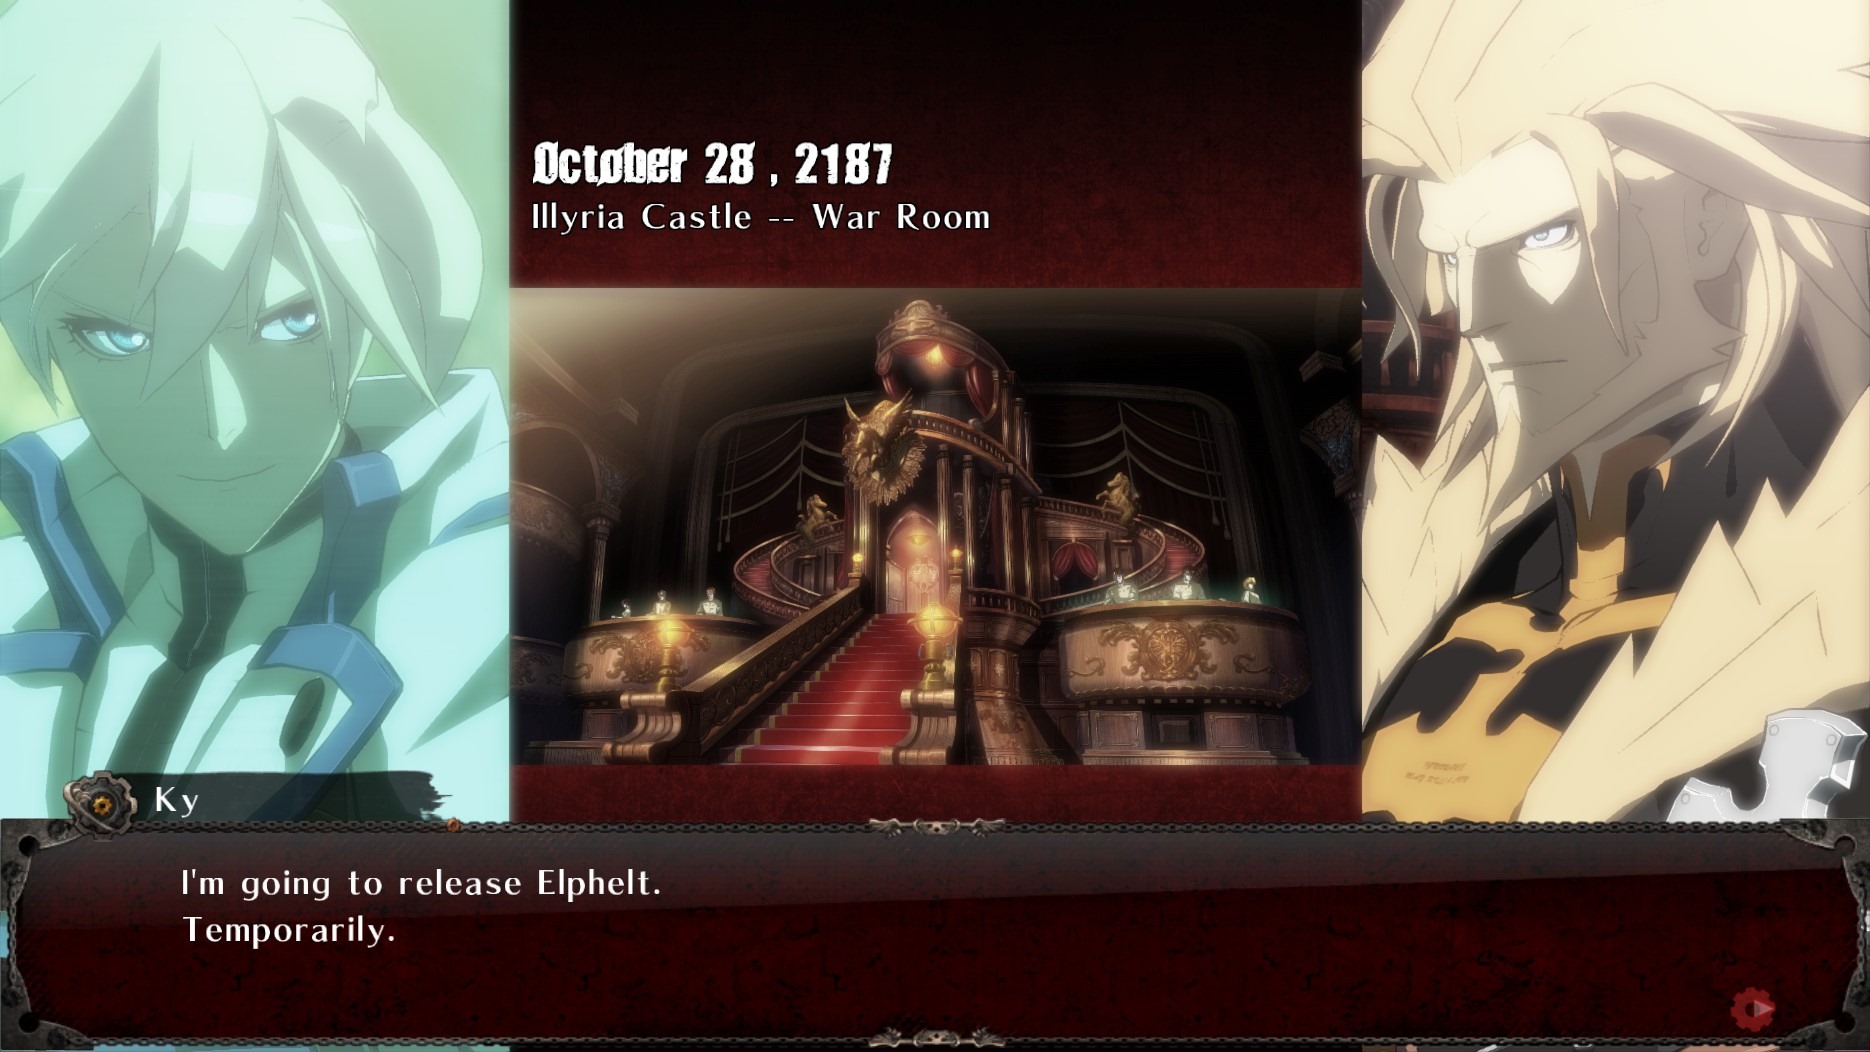 Guilty Gear Xrd Sign Strikes Steam On Wednesday Siliconera